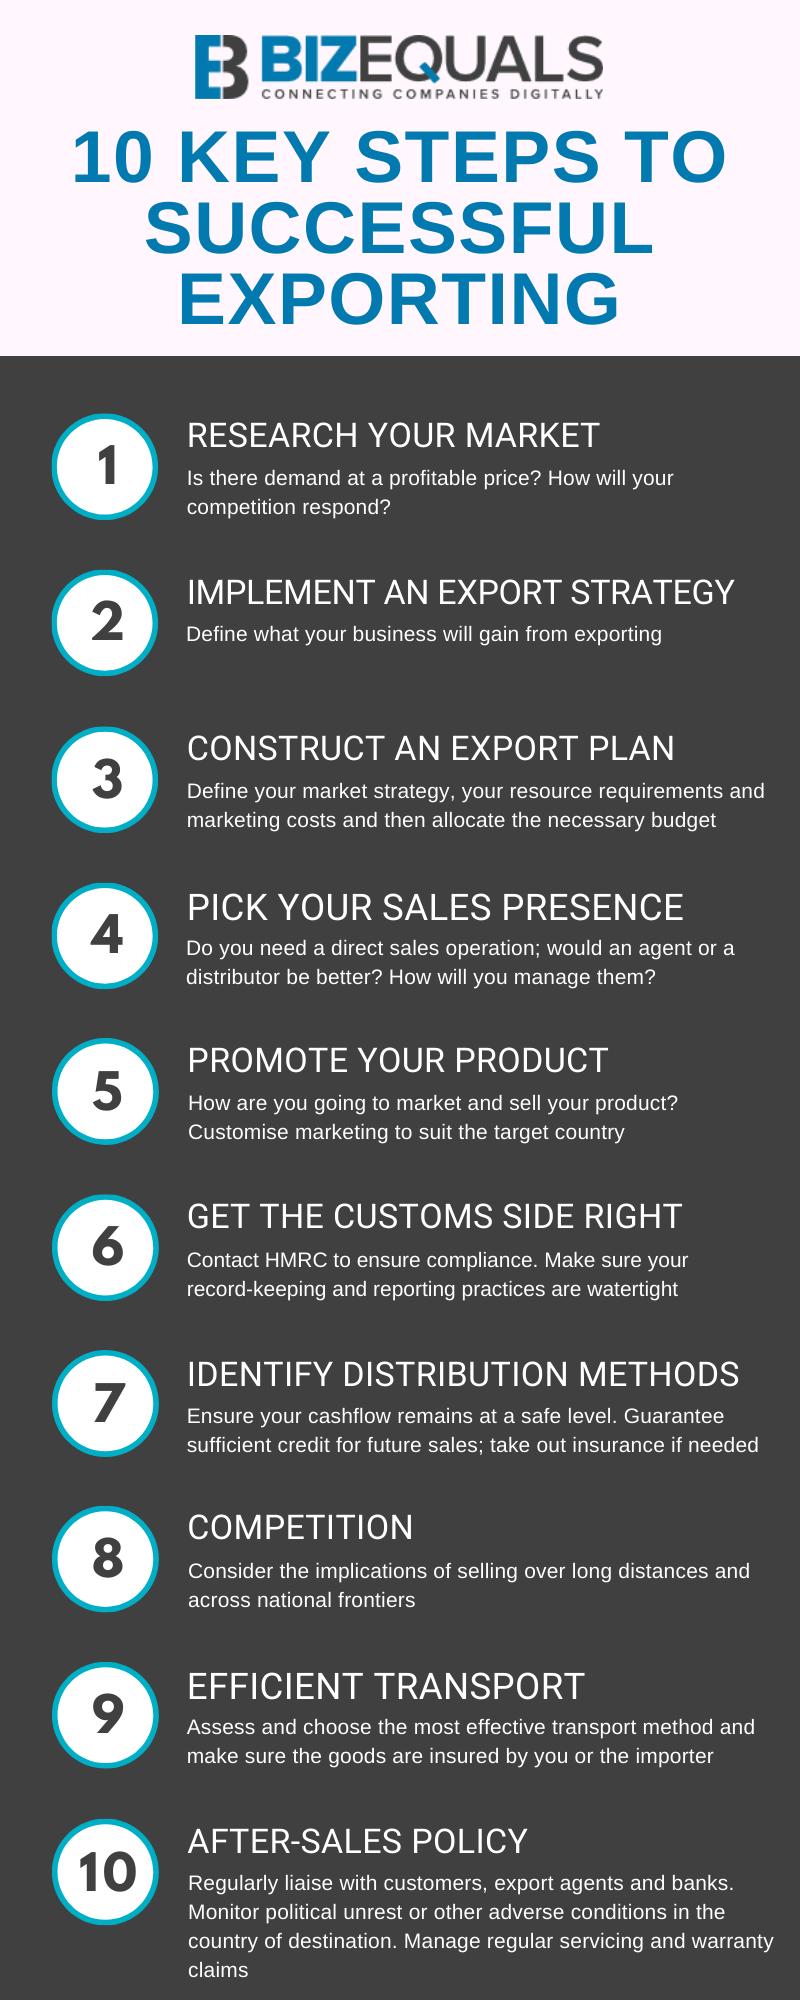 10 key steps to successful exporting infographic